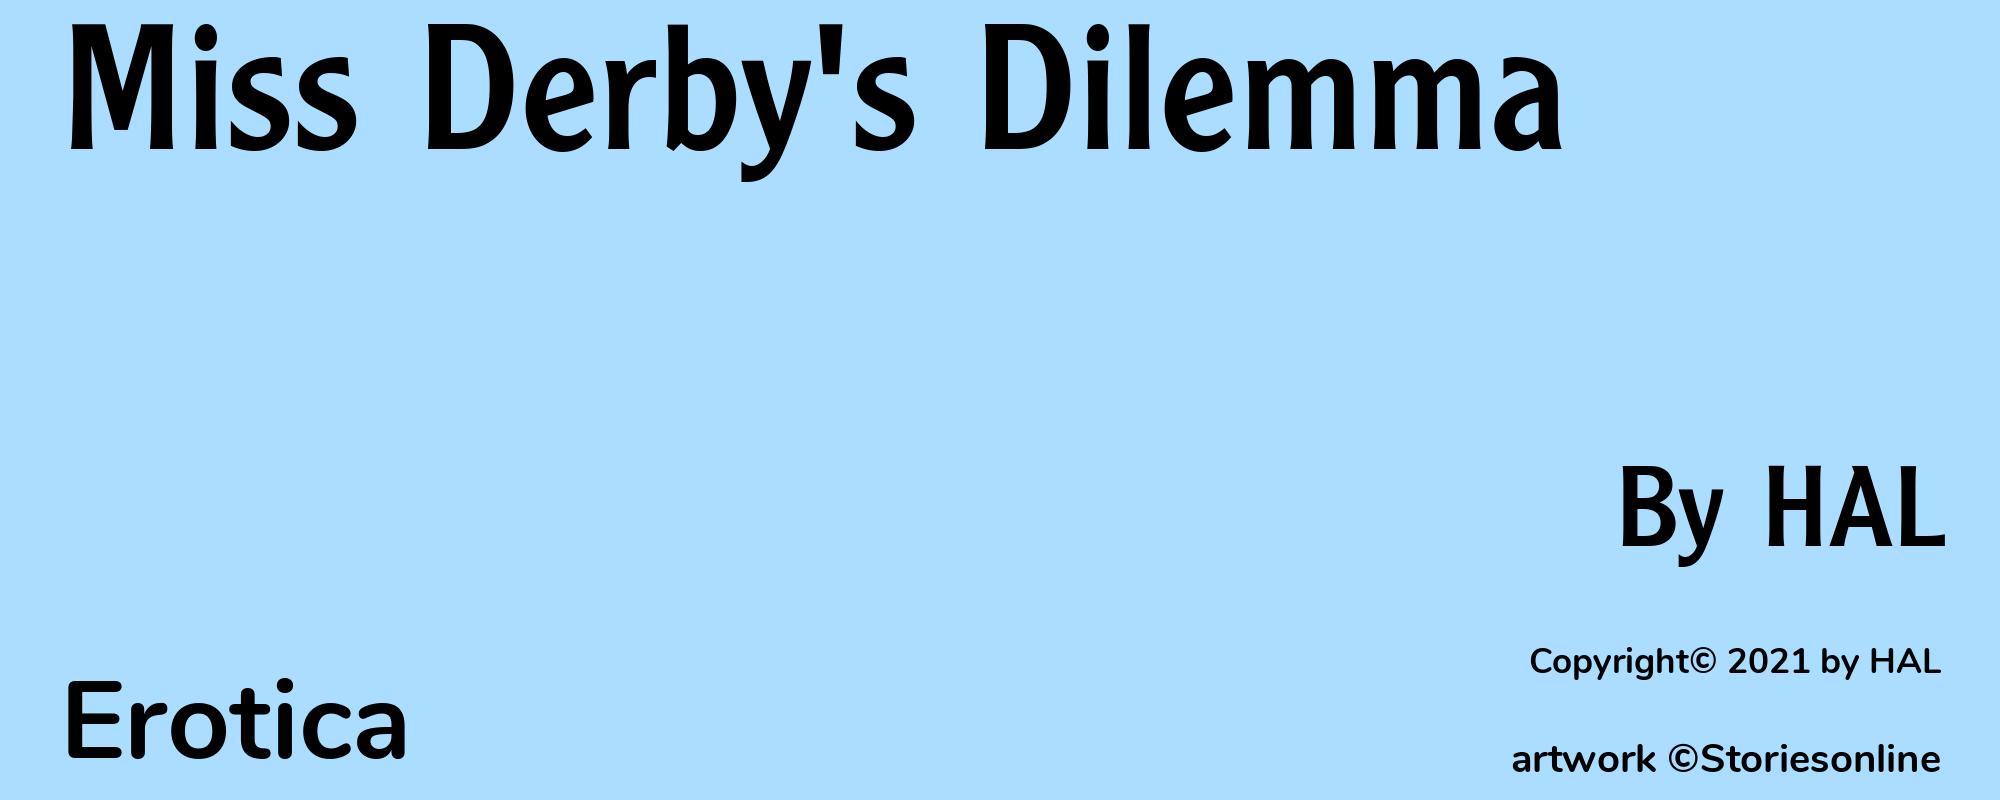 Miss Derby's Dilemma - Cover